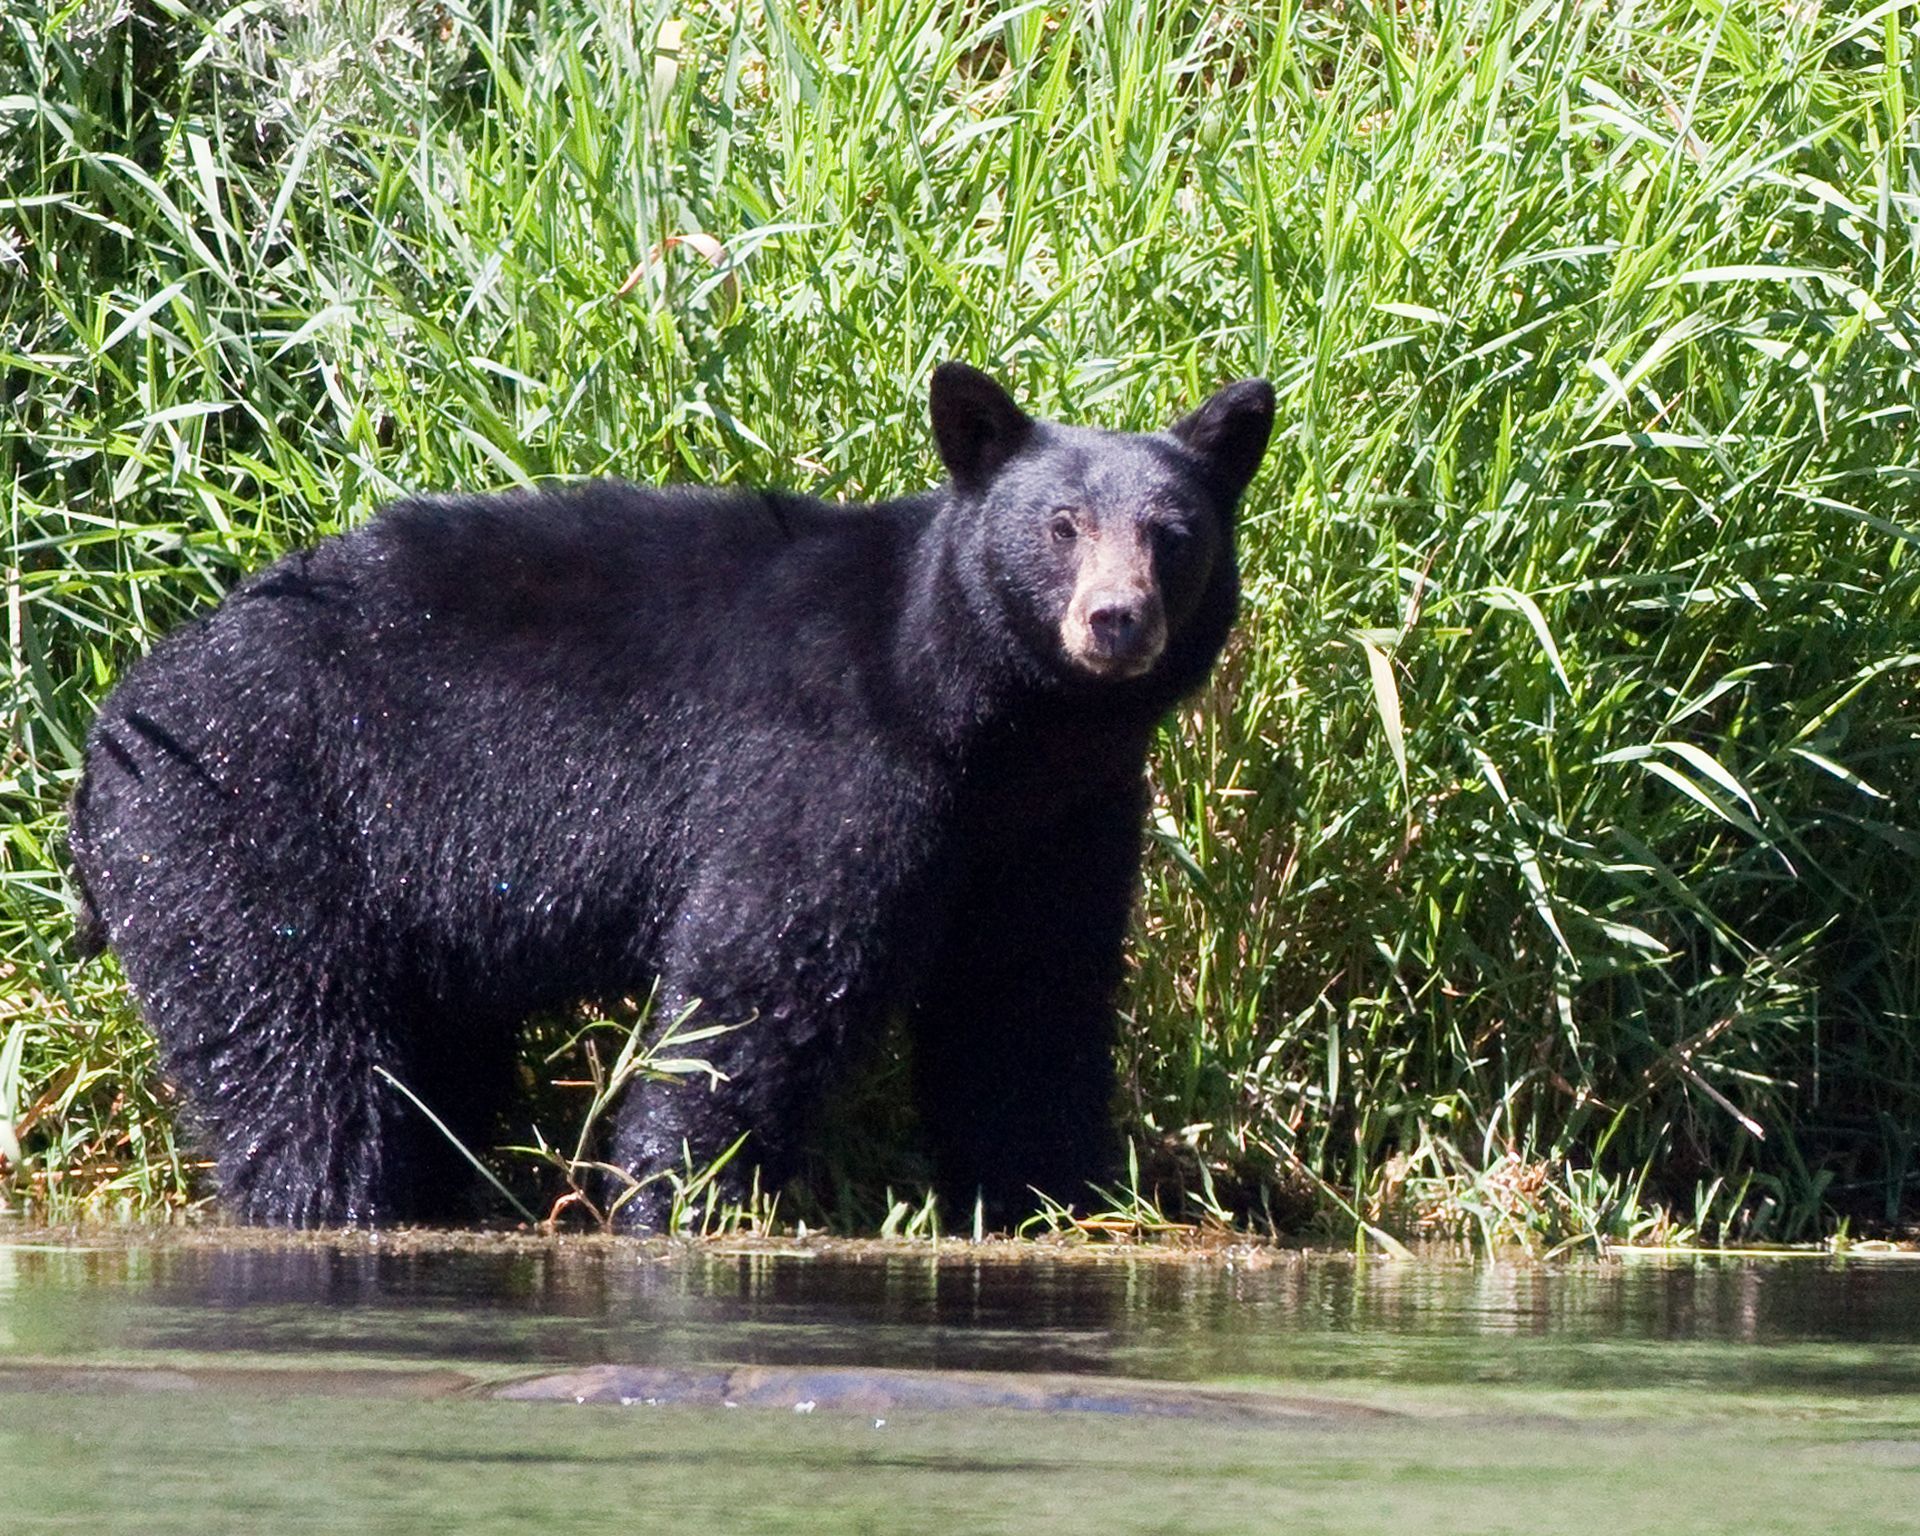 a black bear standing in the grass near a body of water